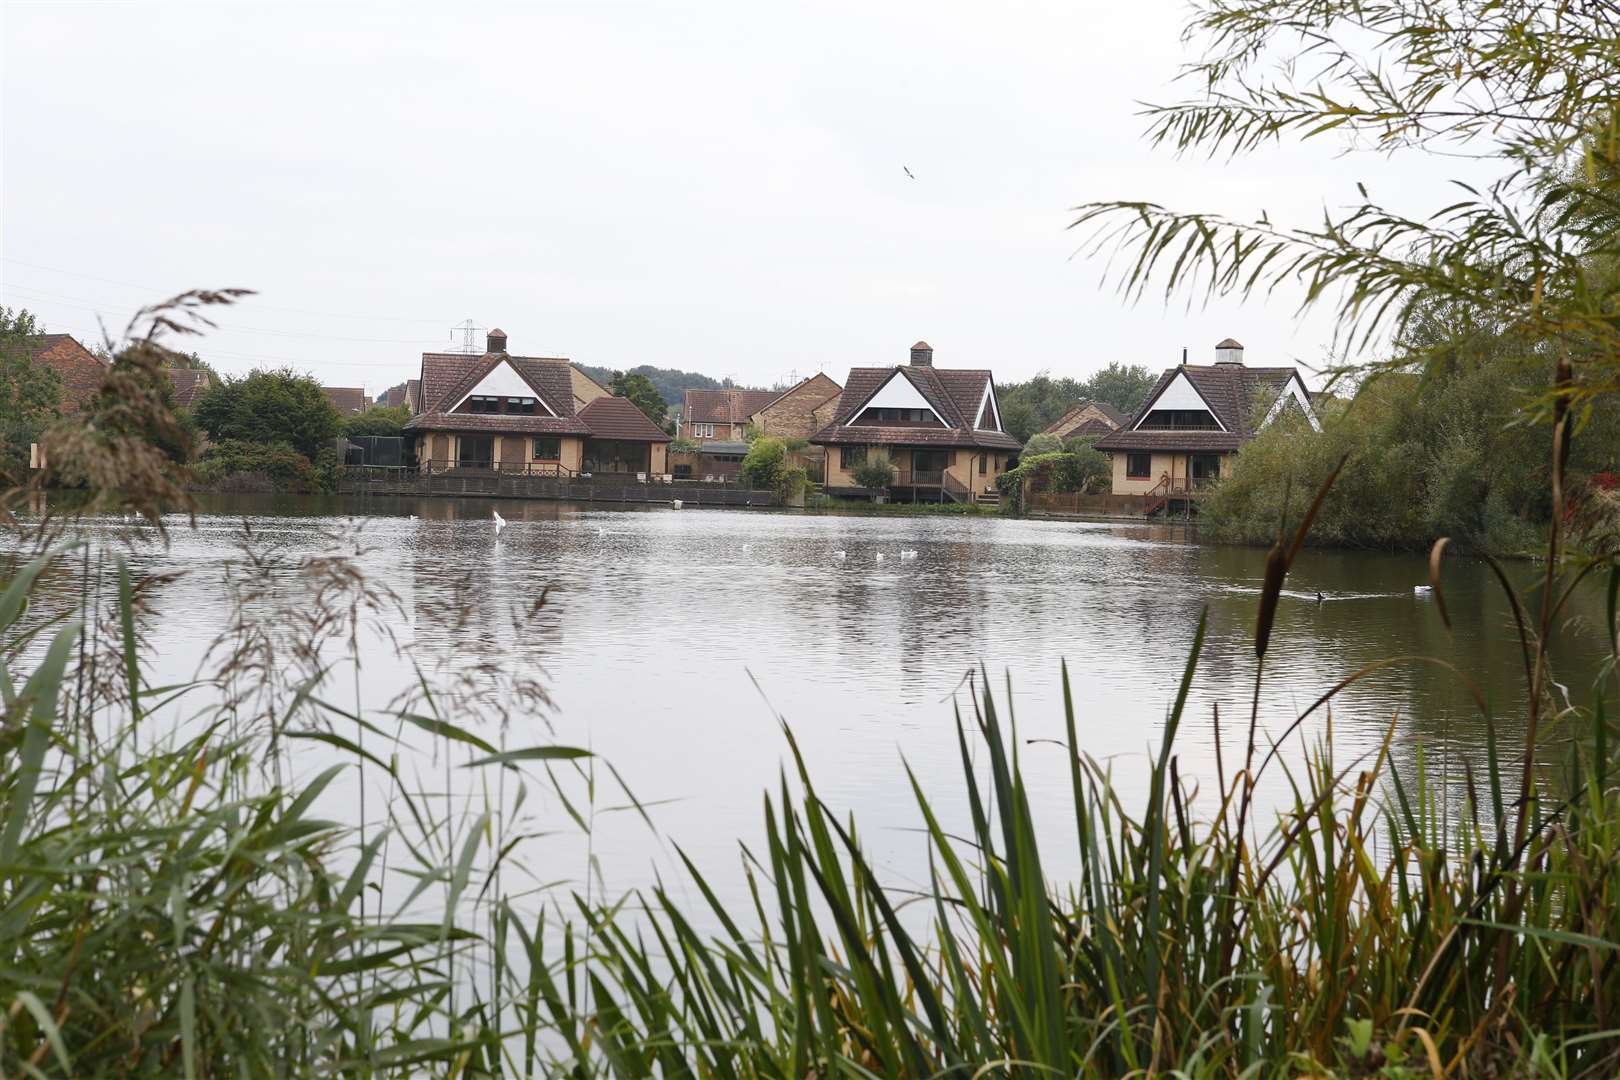 A woman was reportedly sexually assaulted near Singleton Lake in Ashford. Picture: Andy Jones